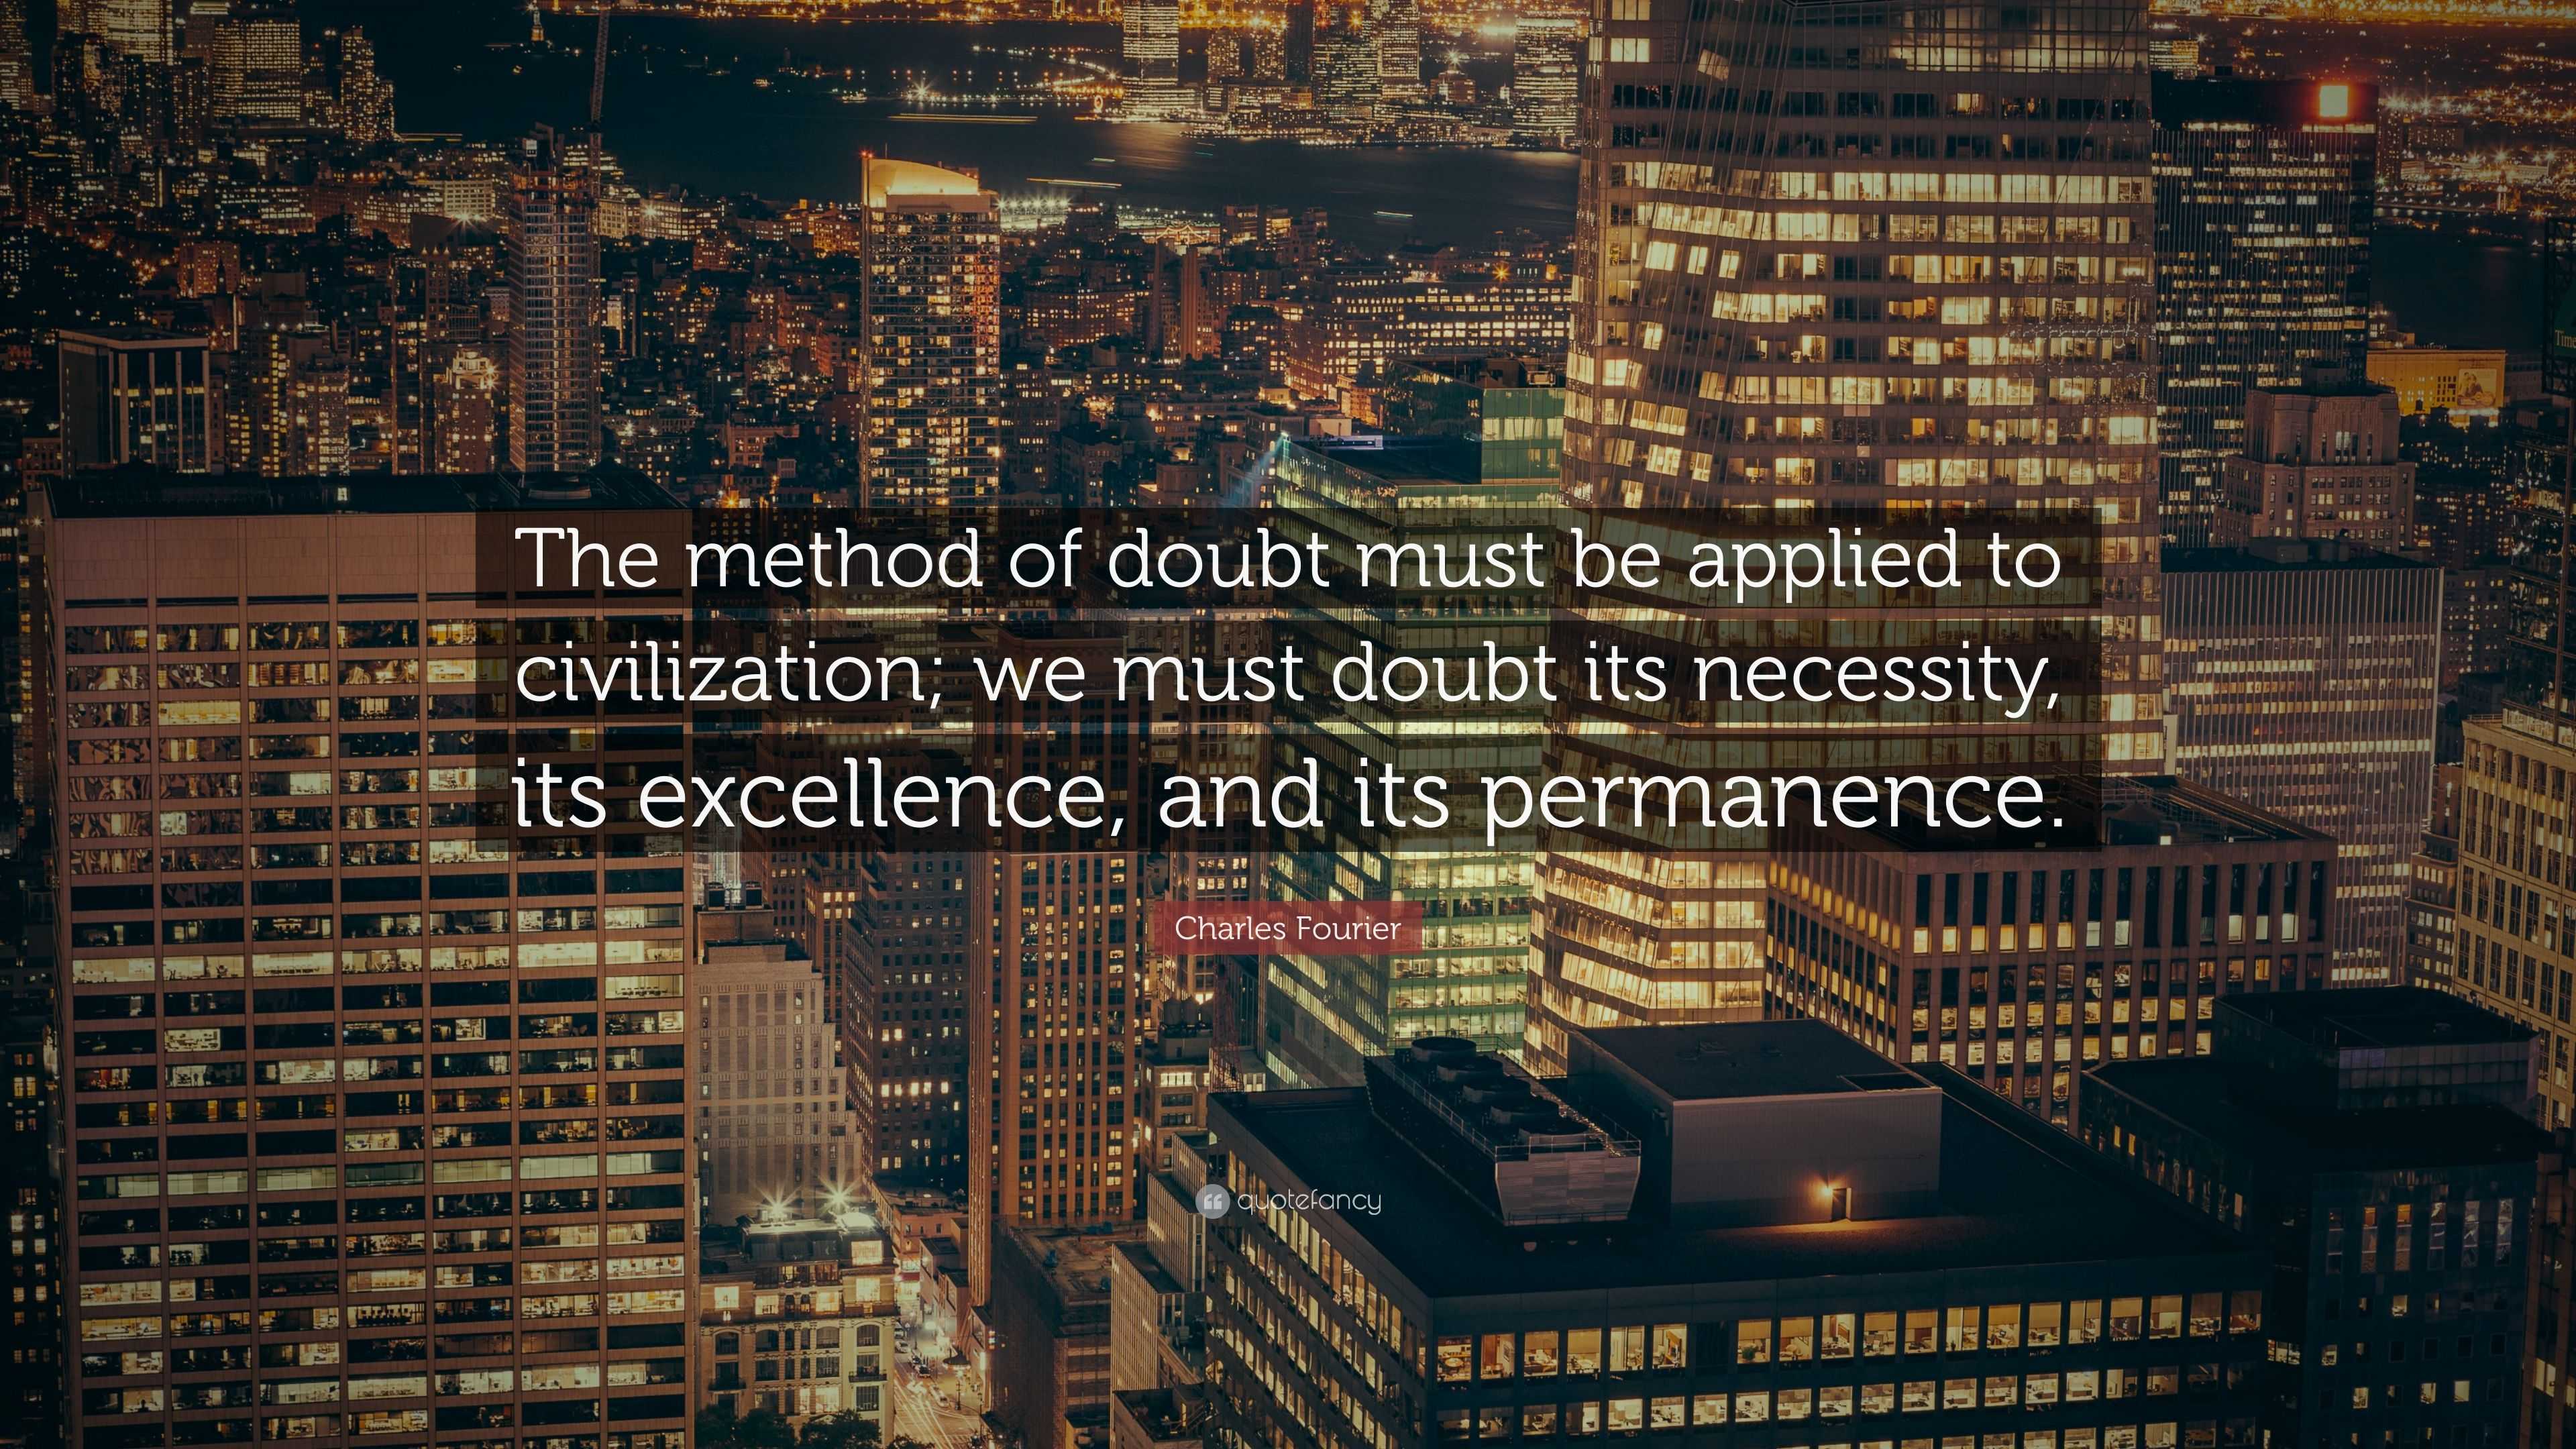 Charles Fourier Quote: “The method of doubt must be applied to ...